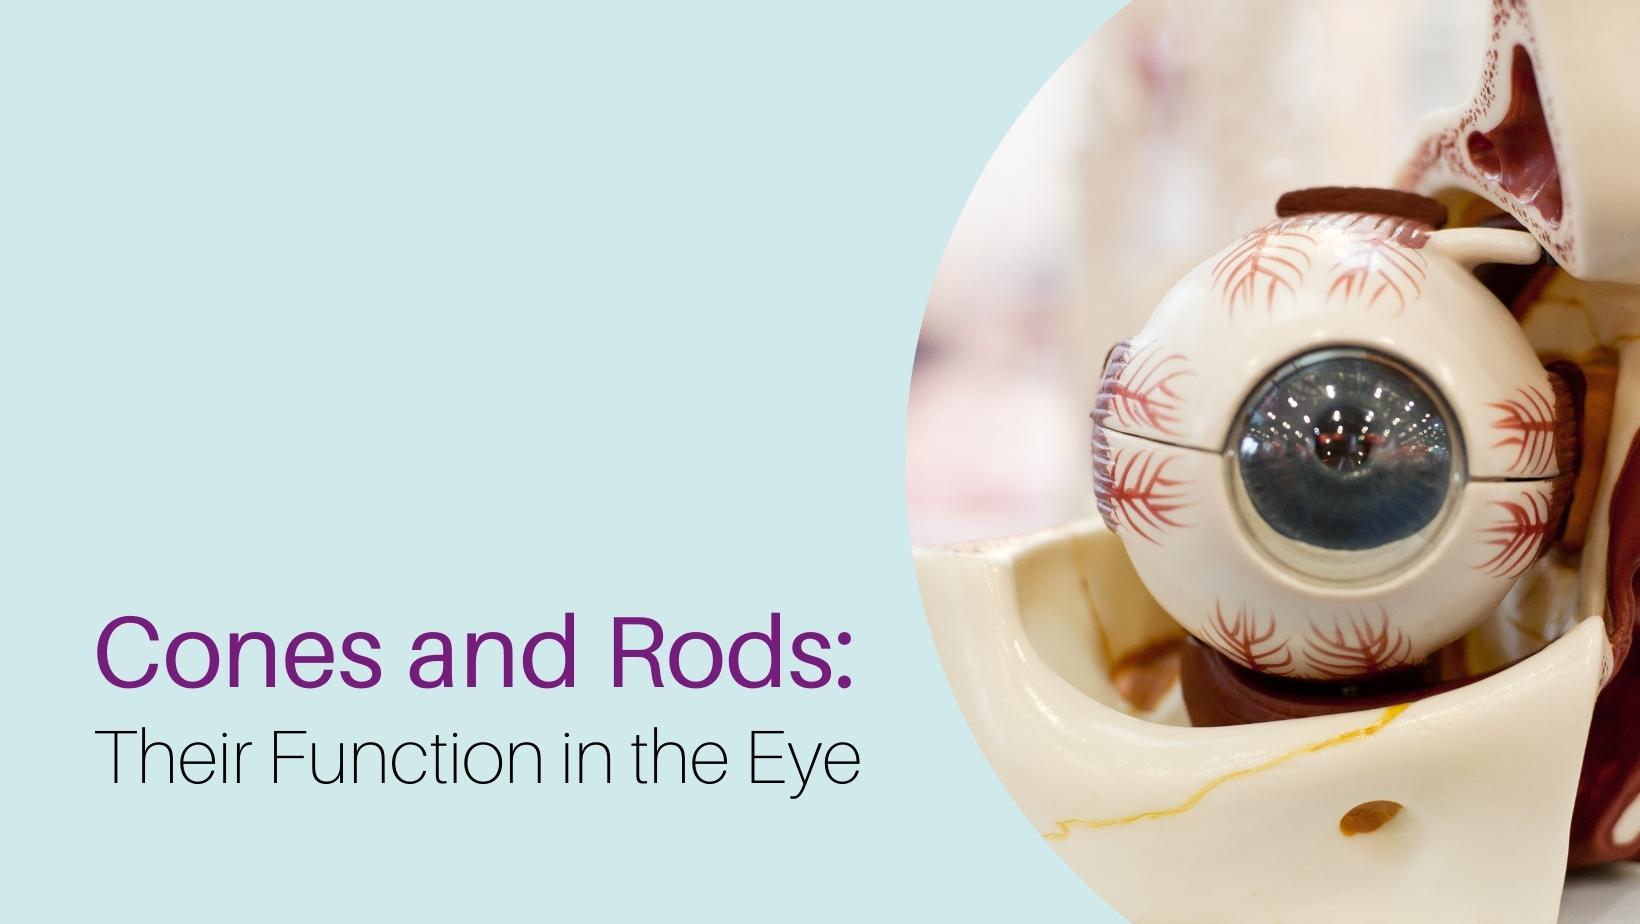 Cones and Rods: Their Function in the Eye